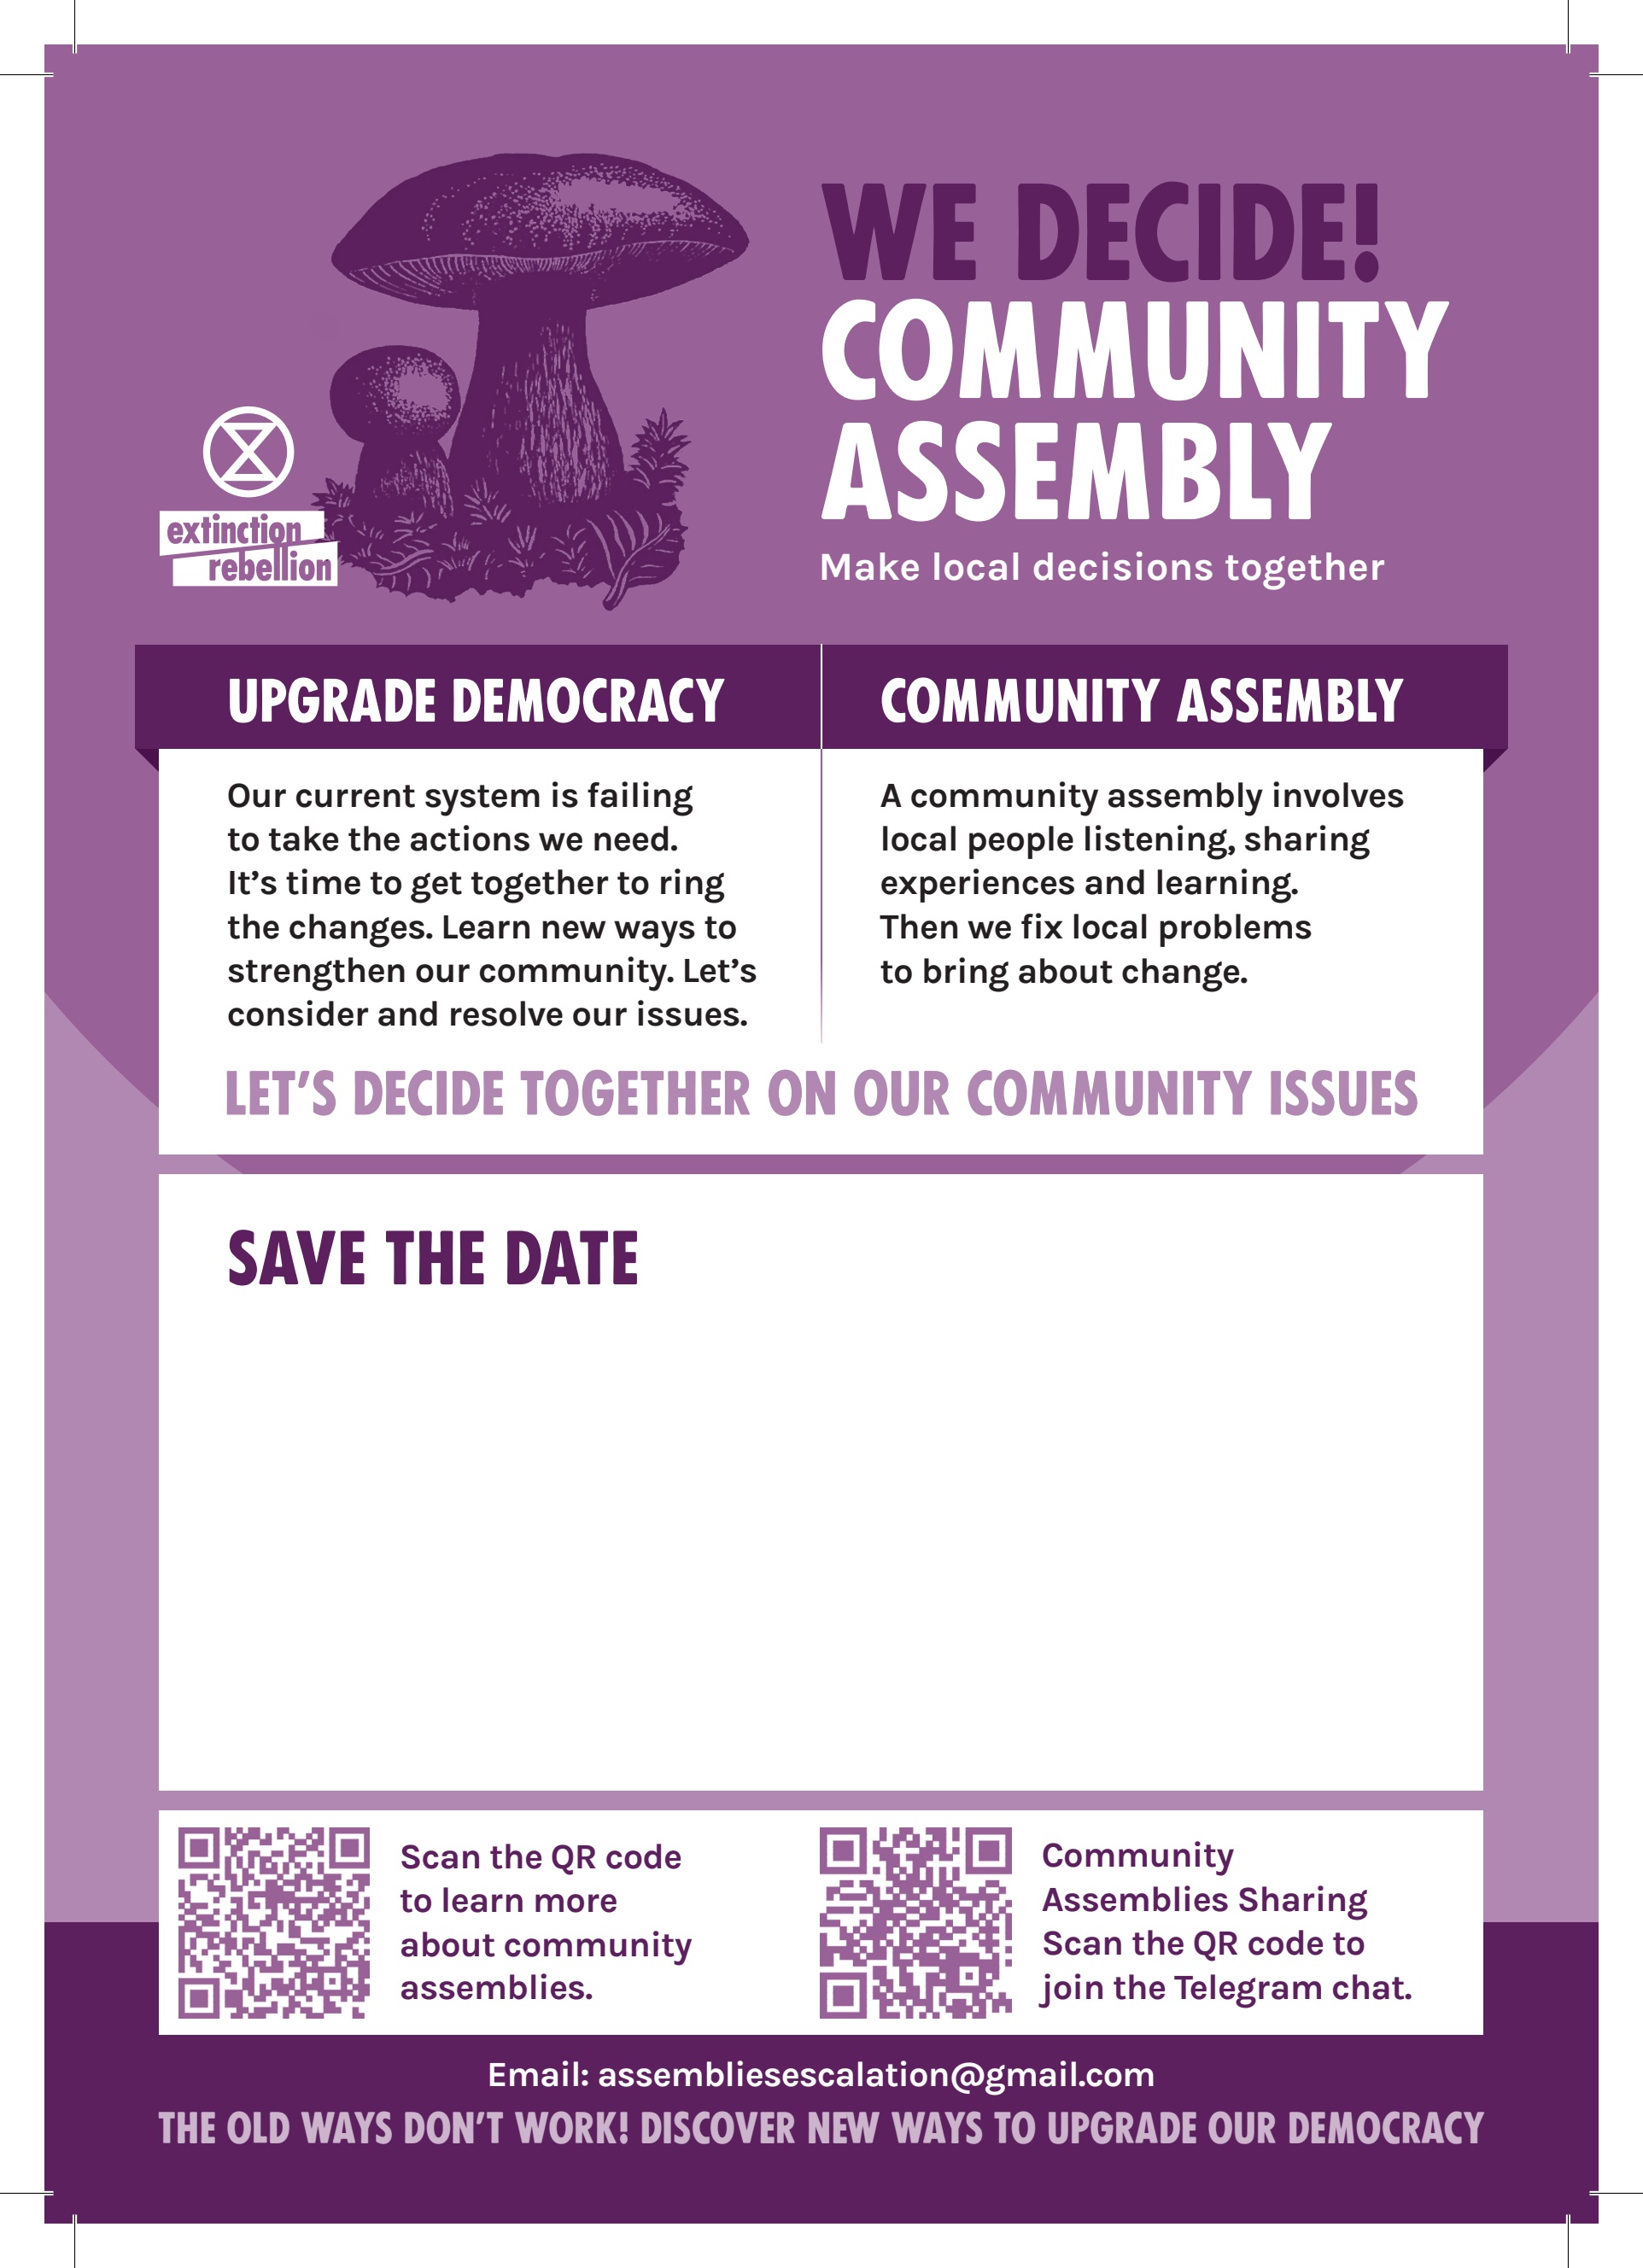 Community Assembly flyer (without text)